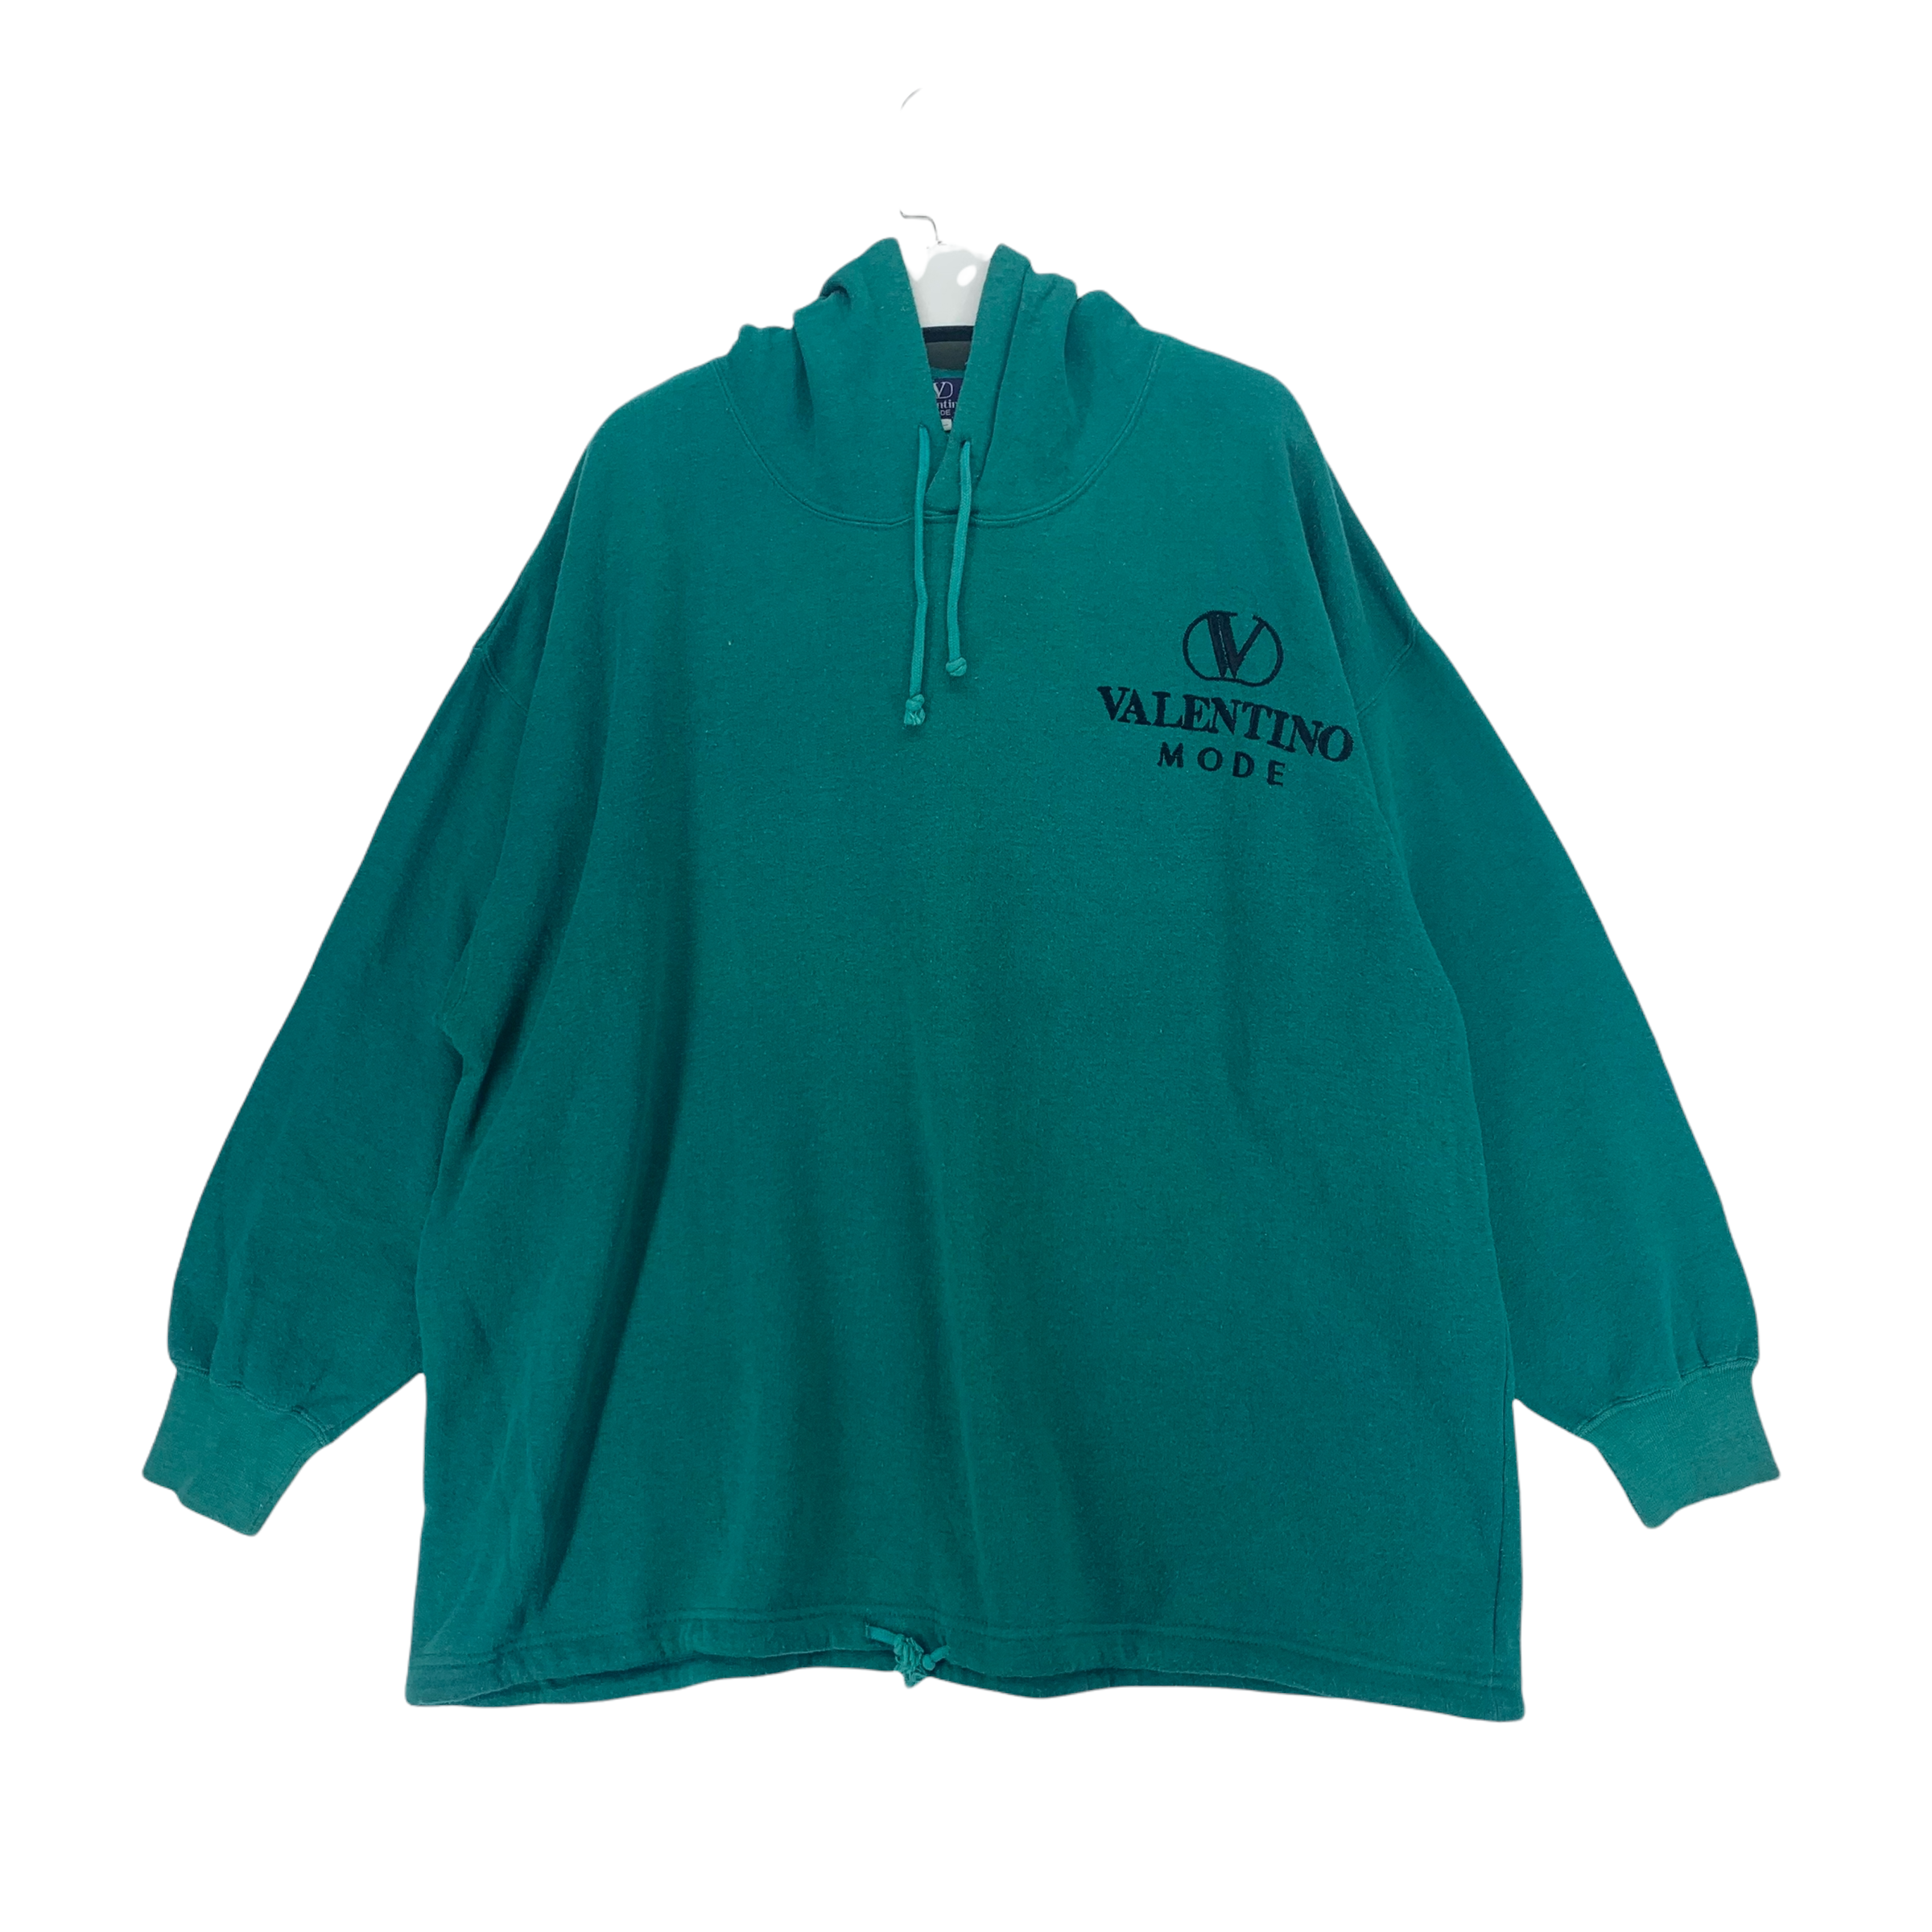 Valentino Mode Pullover Green Hoodies #3471-123 - 1